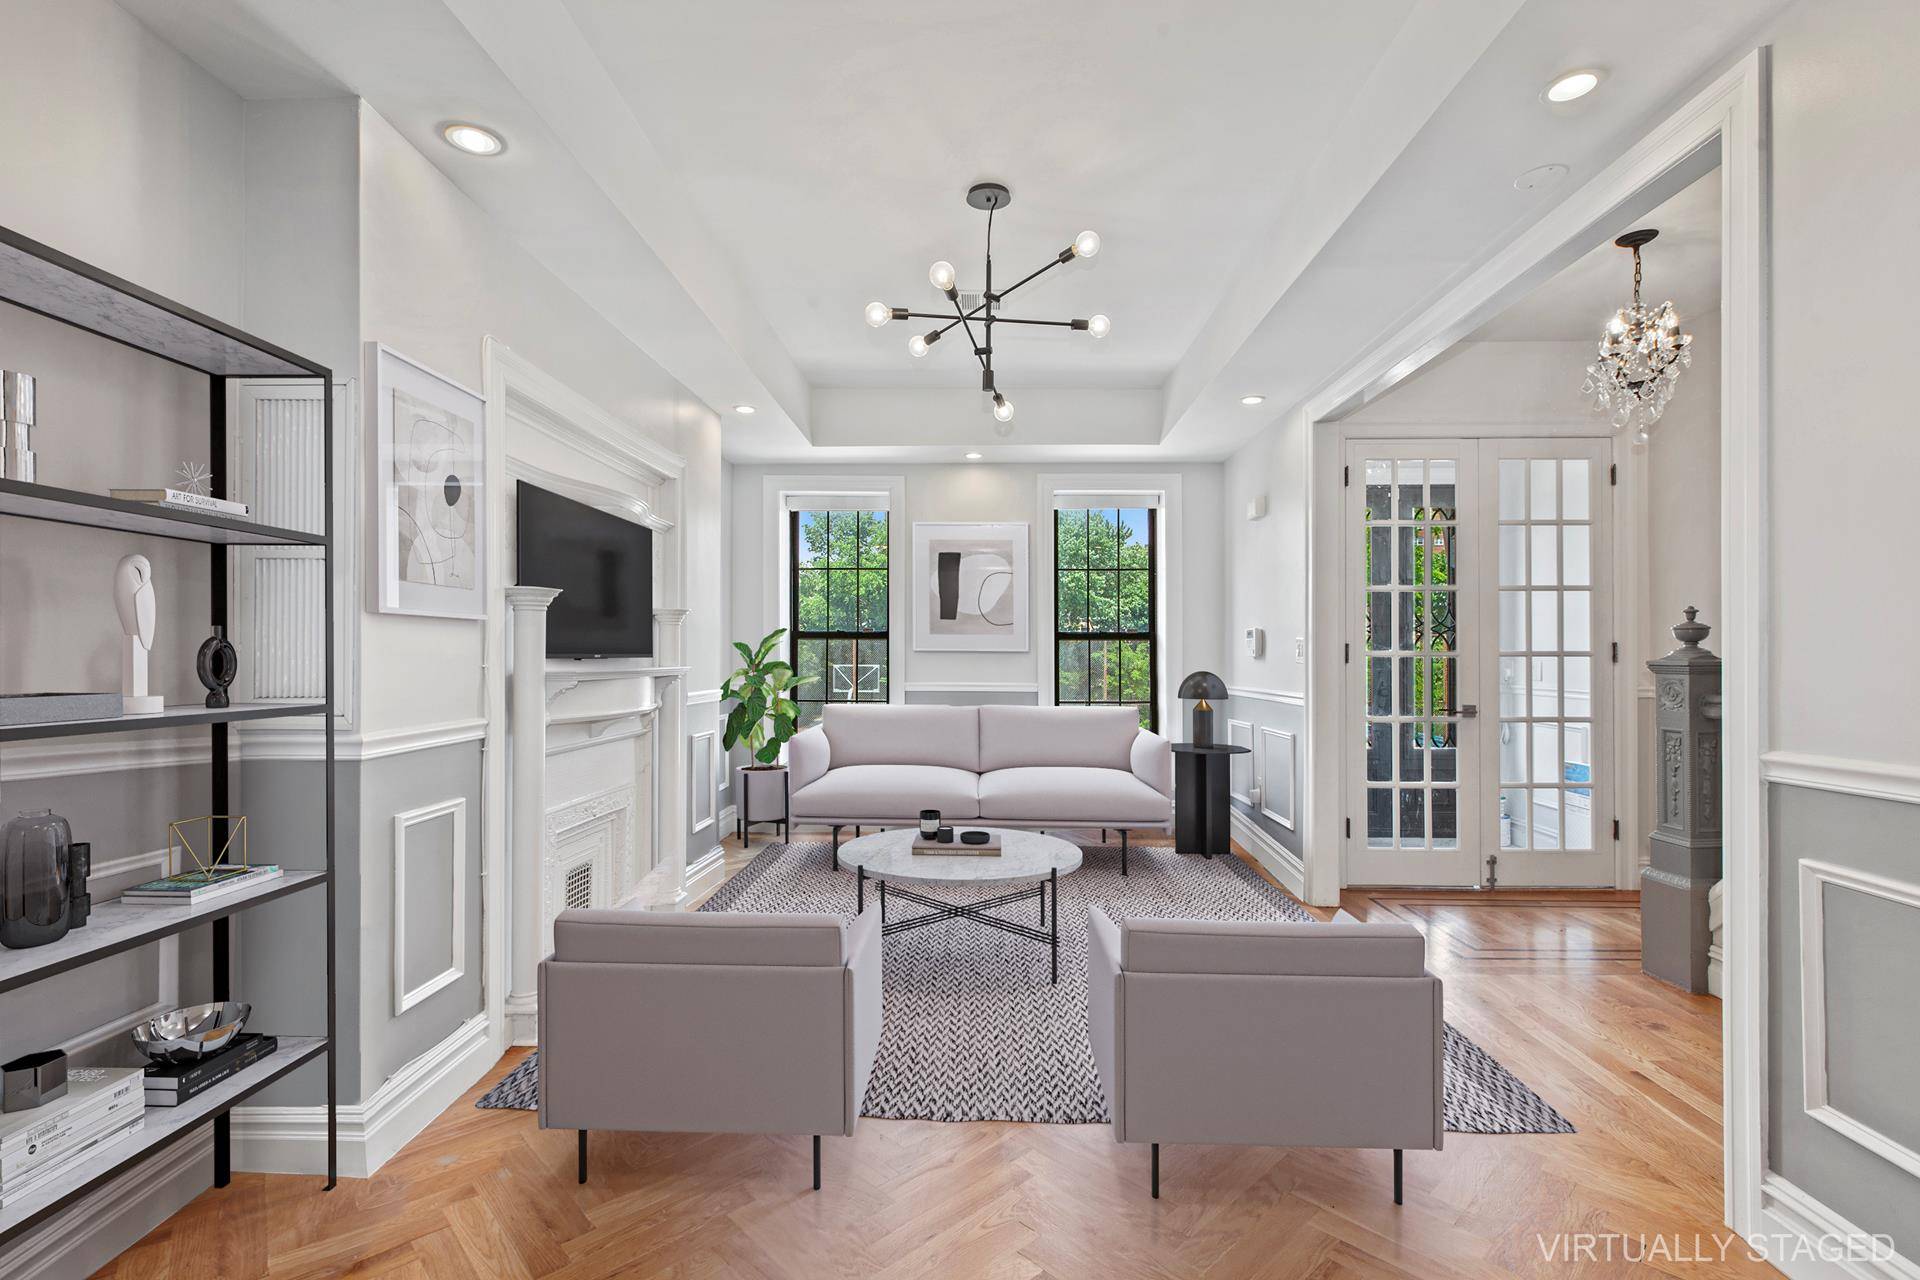 Photos are virtually staged Introducing 1208 Sterling Place, a recently renovated 2 family town home, situated on a charming block in the historical Crown Heights section of Brooklyn.